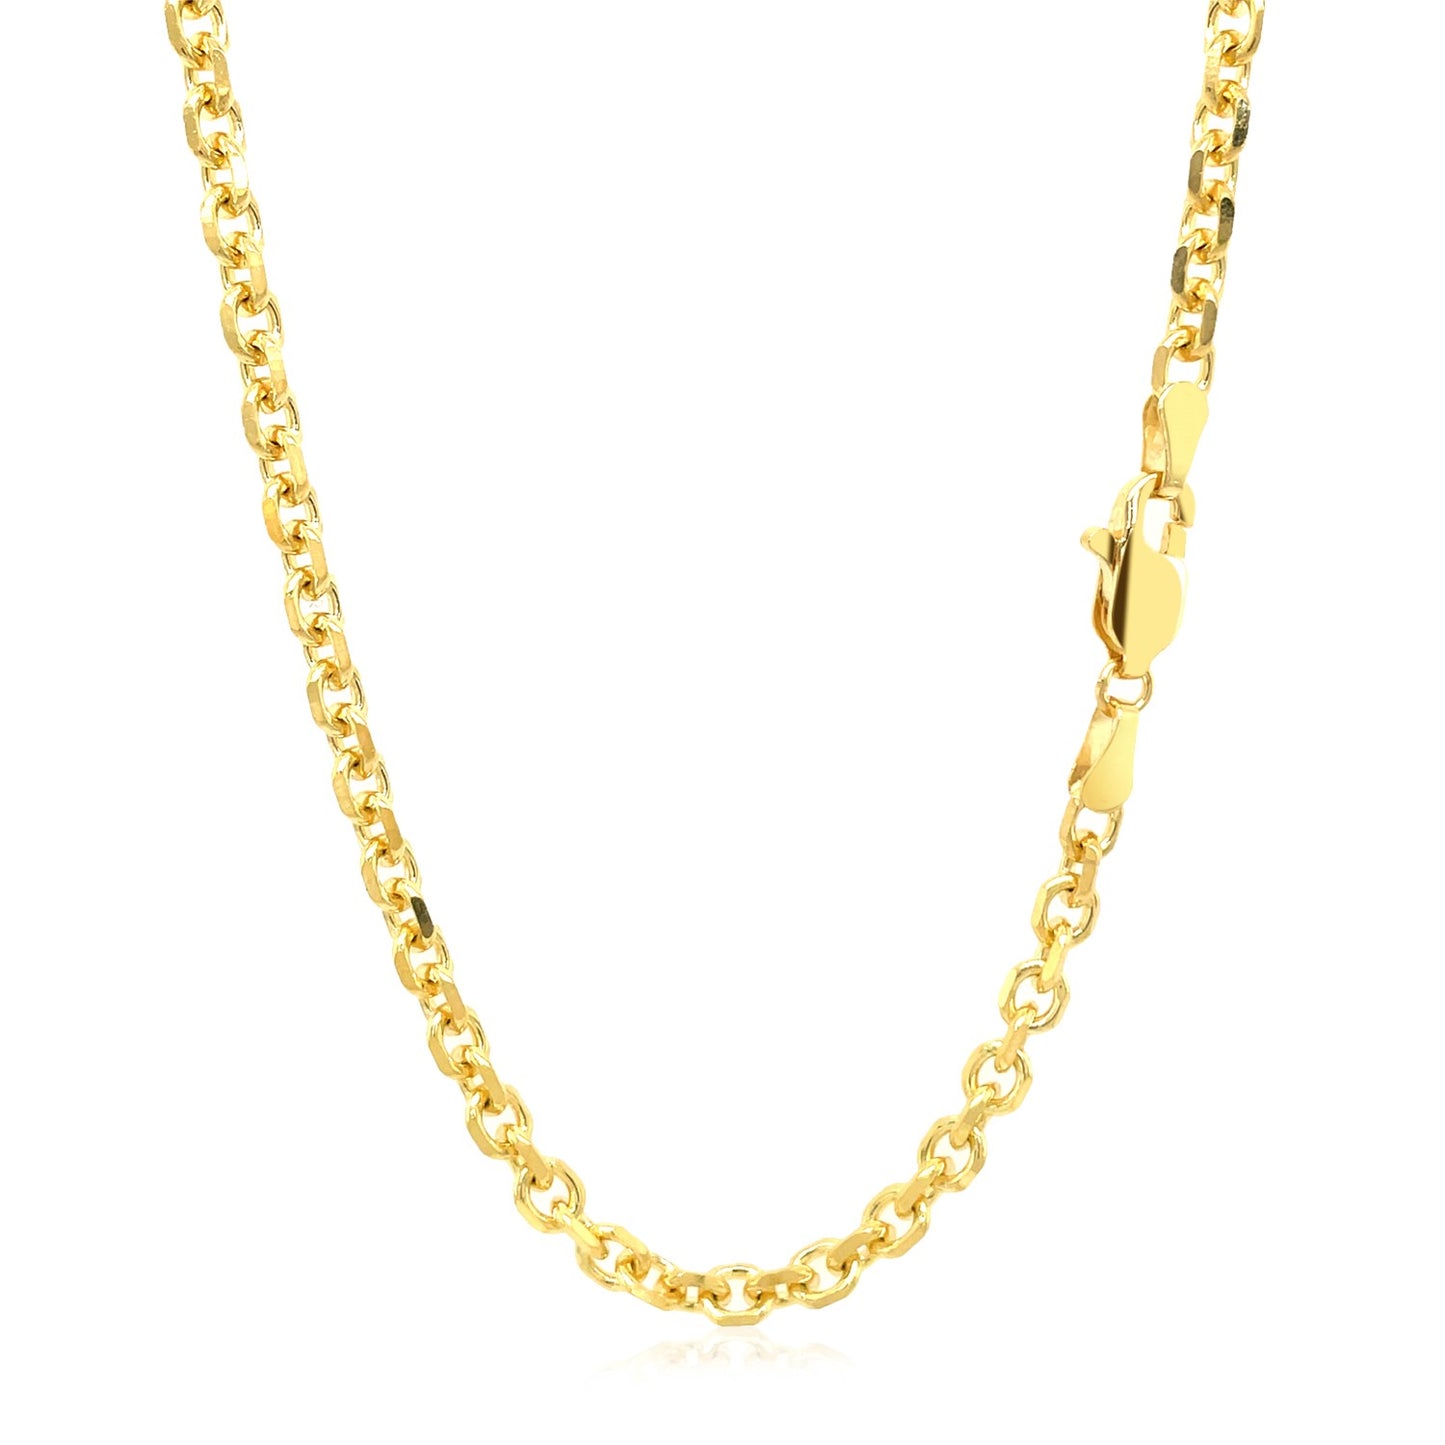 4.0mm 14k Yellow Gold Diamond Cut Cable Link Chain